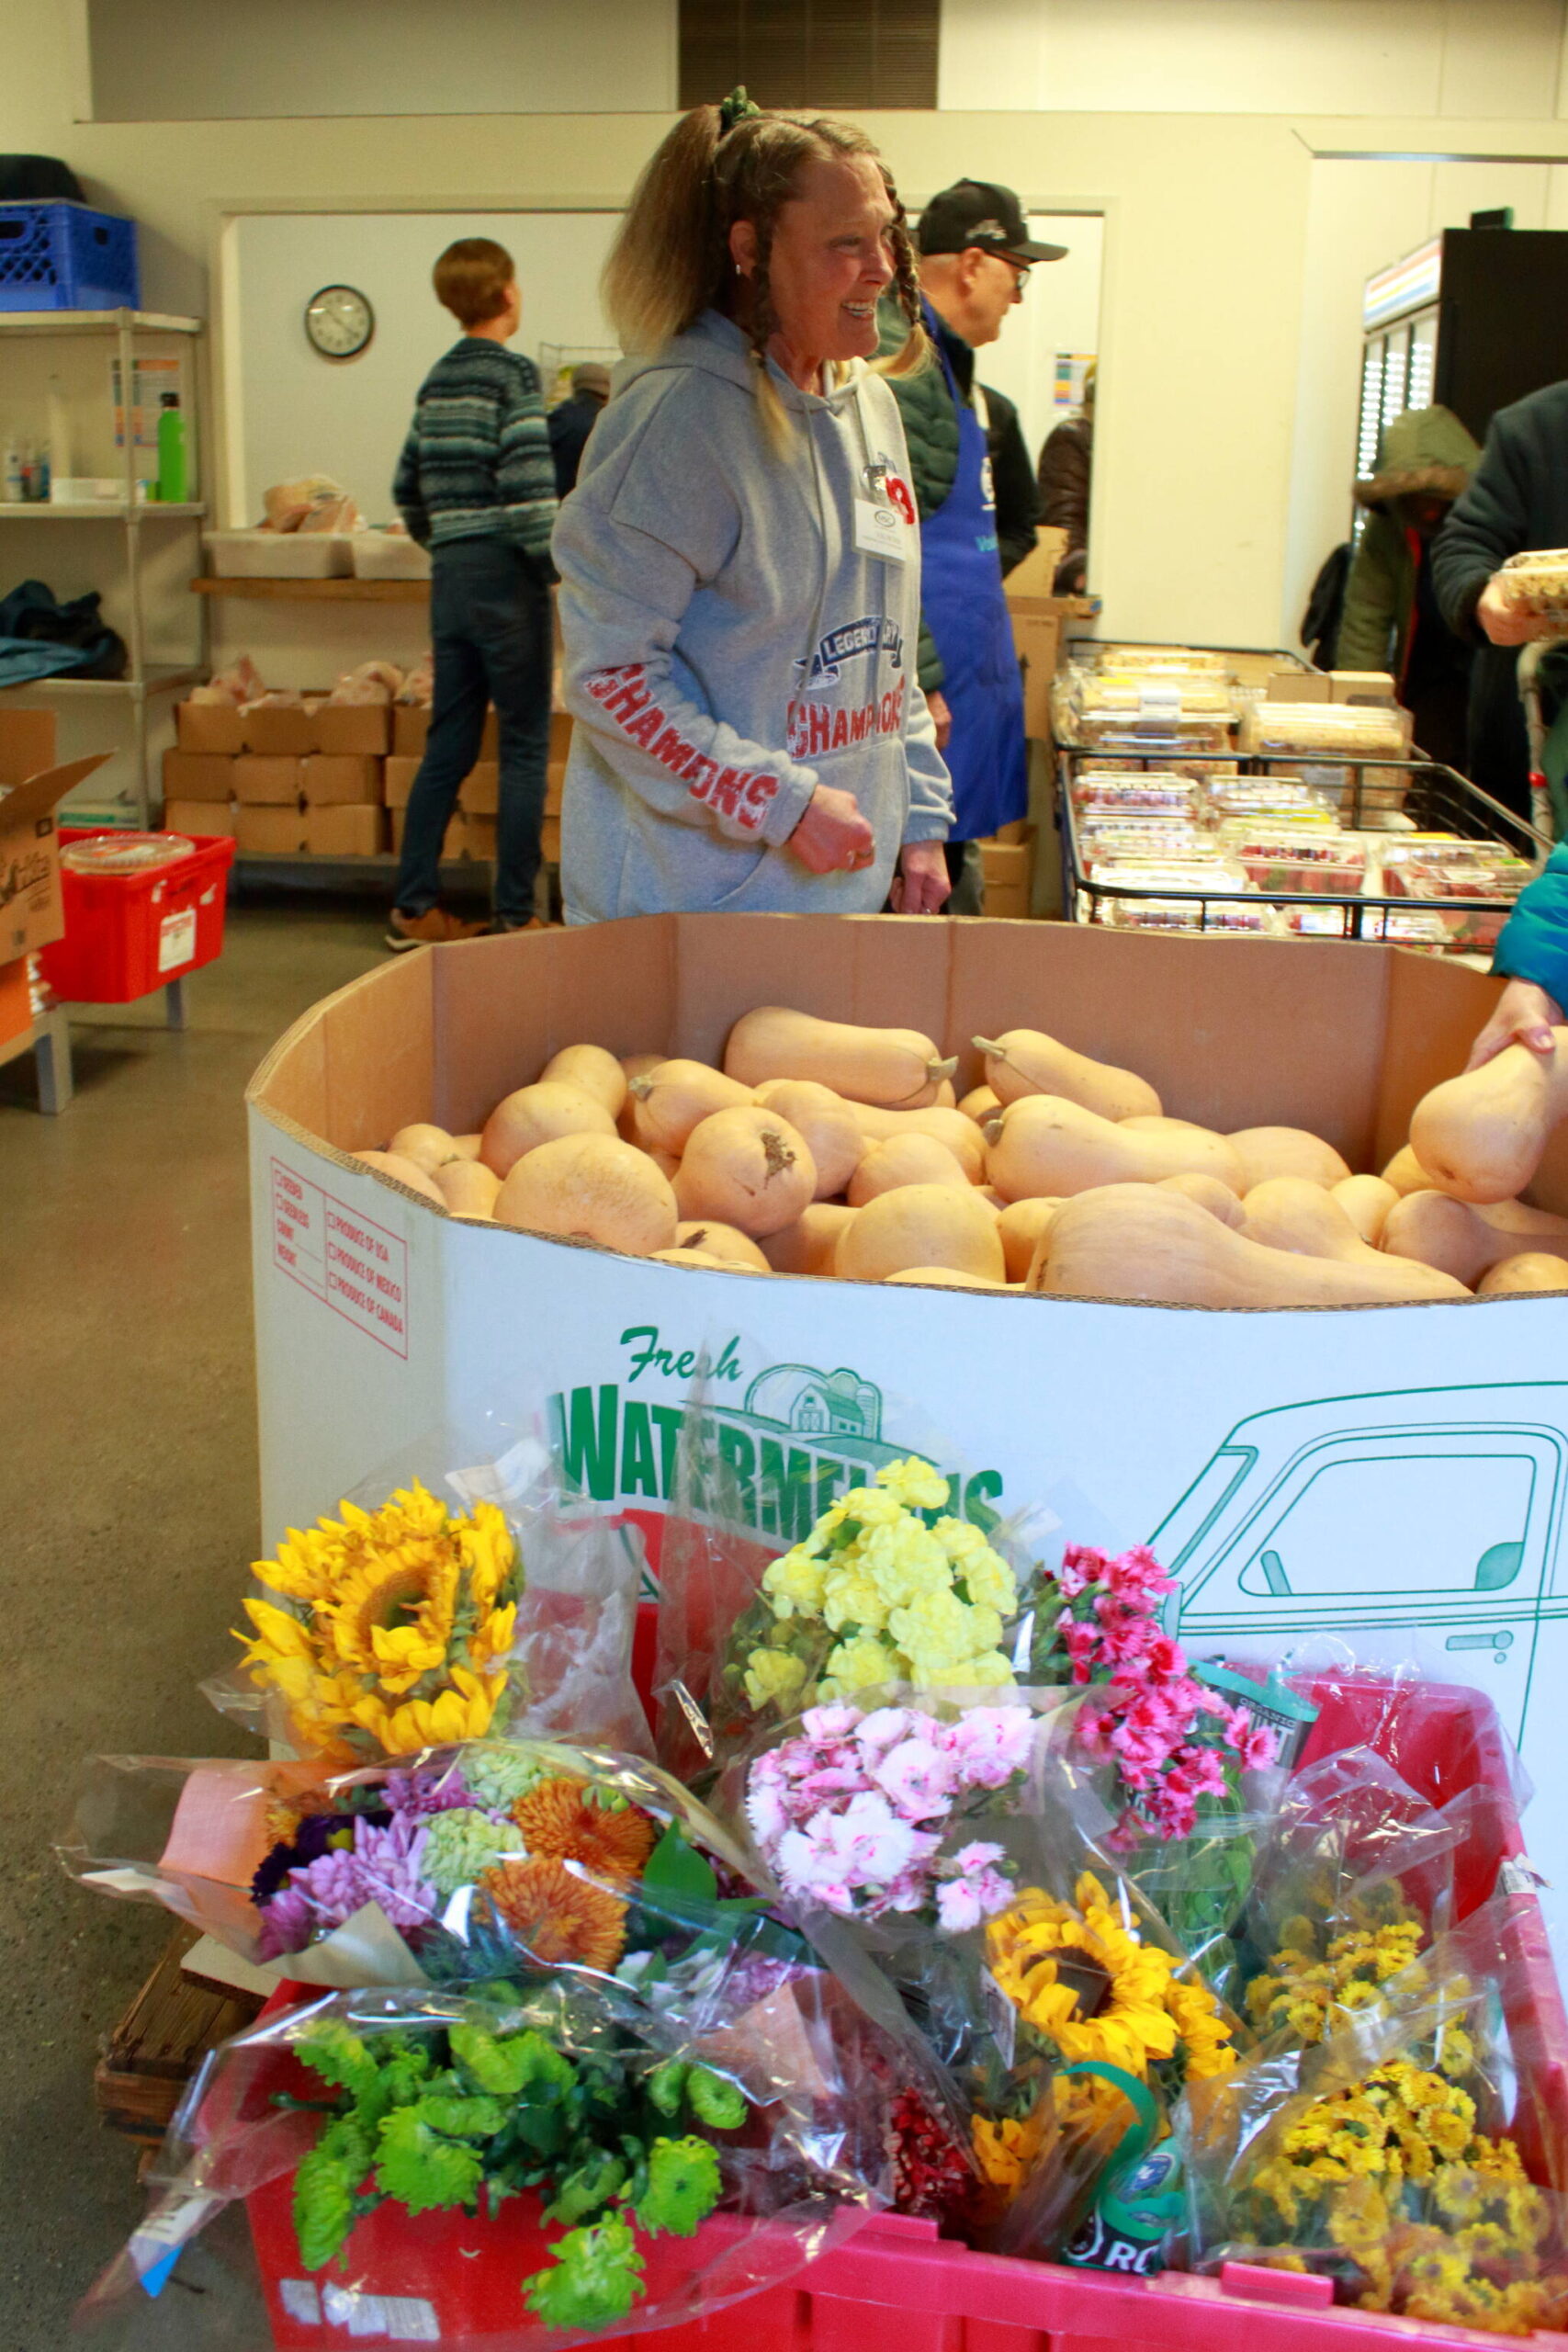 The Multi-Service Center Food Bank has many other resources aside from food including toiletries, pet foods and even flowers. Volunteer Shelly Rumpf and first time volunteer and former Decatur teacher Paul Joraanstad serve their community at MSC. Photo by Keelin Everly-Lang / The Mirror